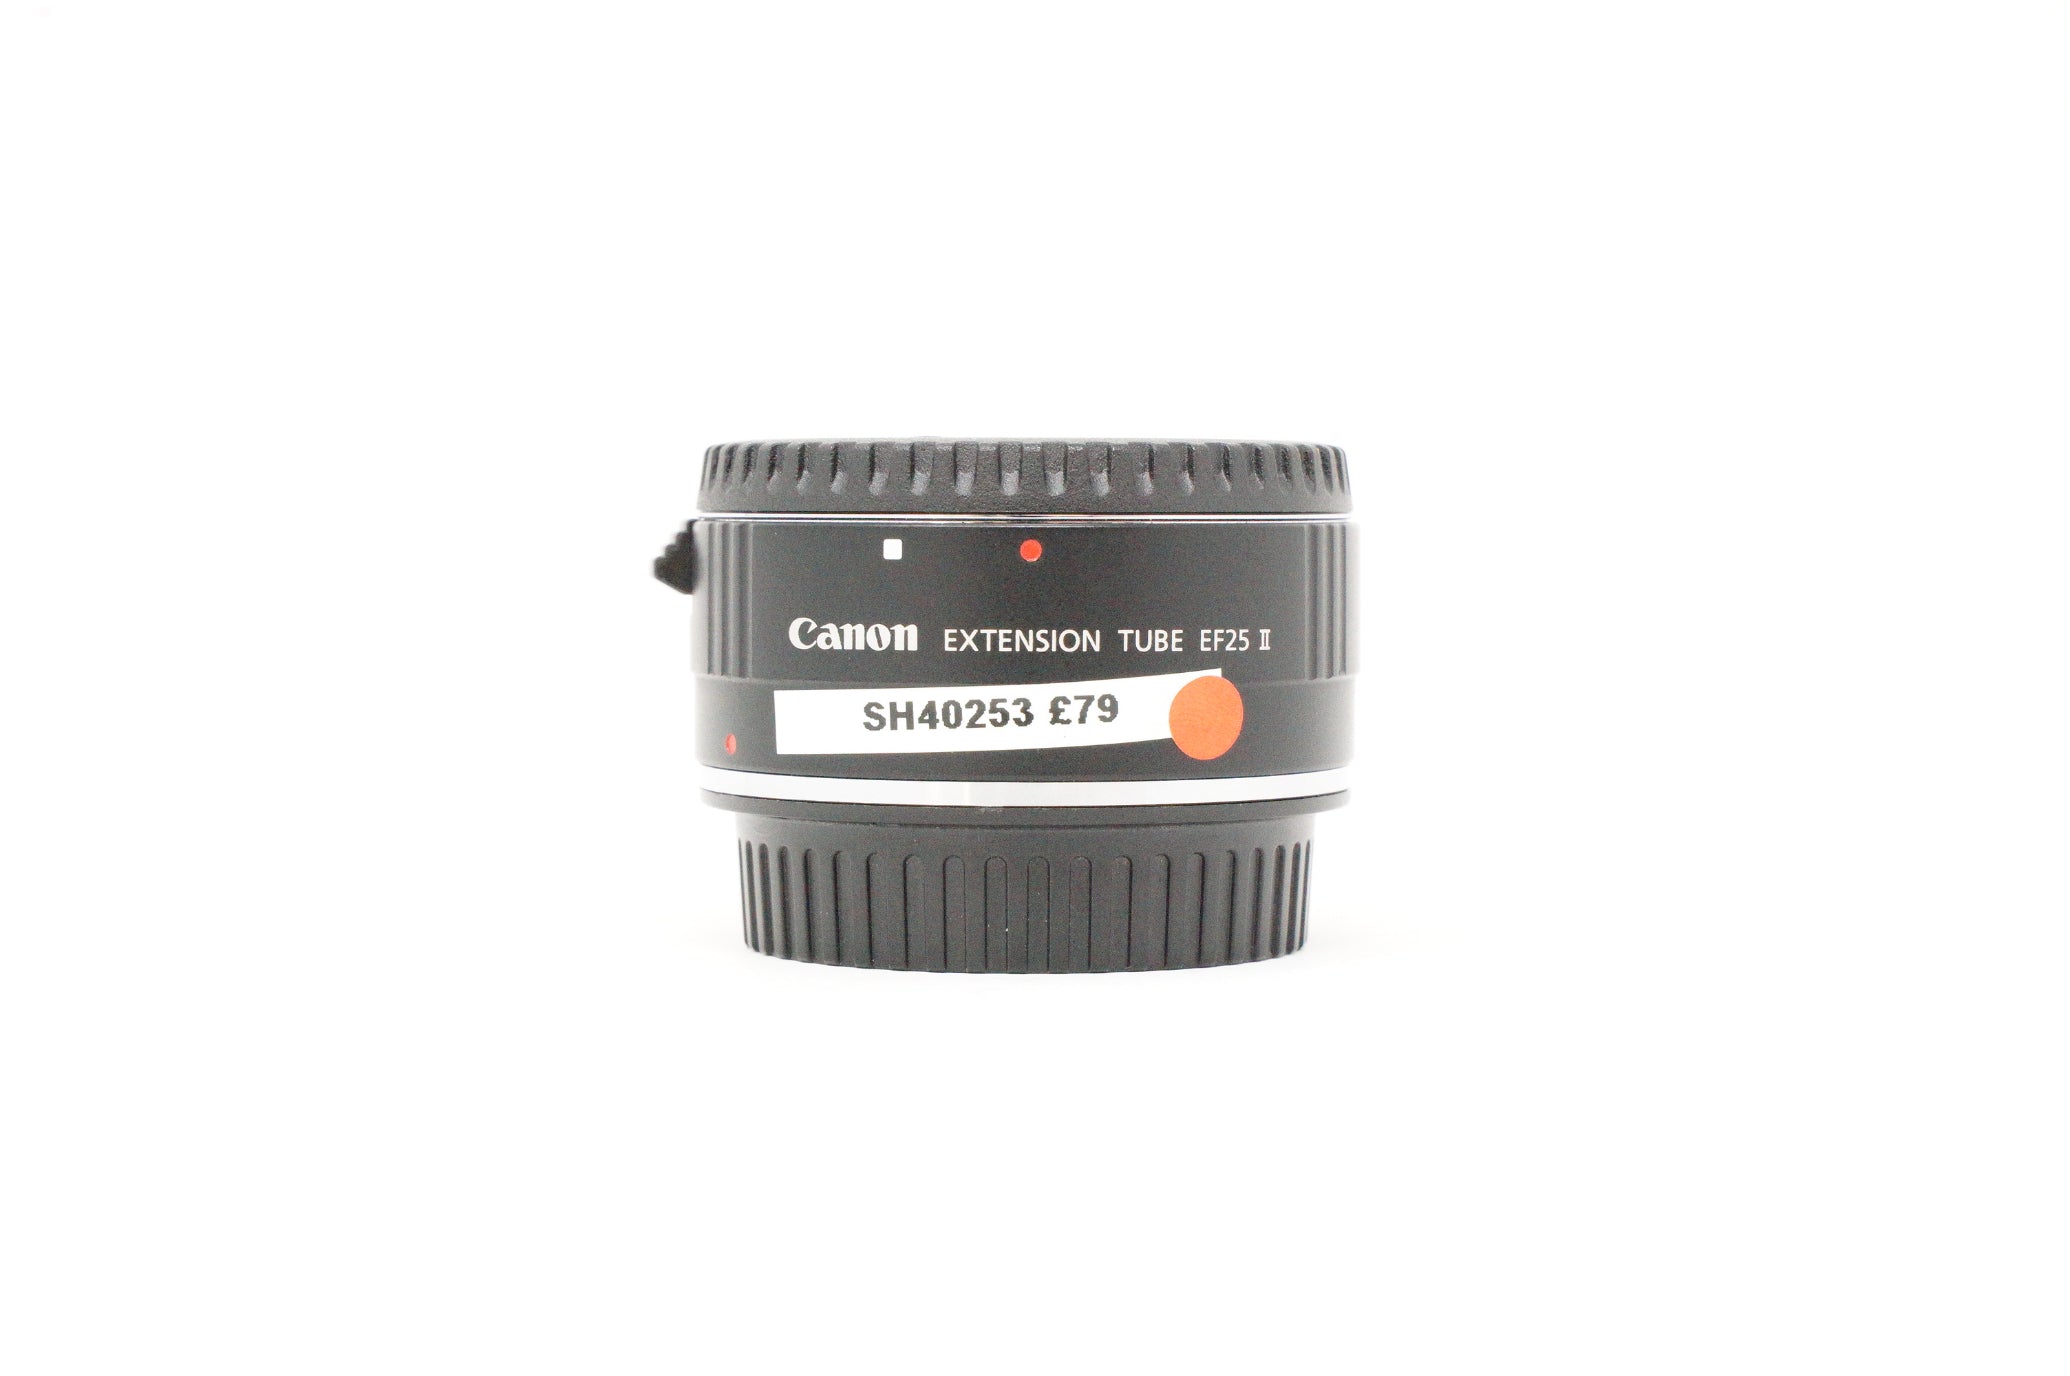 Used Canon Extension Tube EF25 II for macro In Canon EF fit